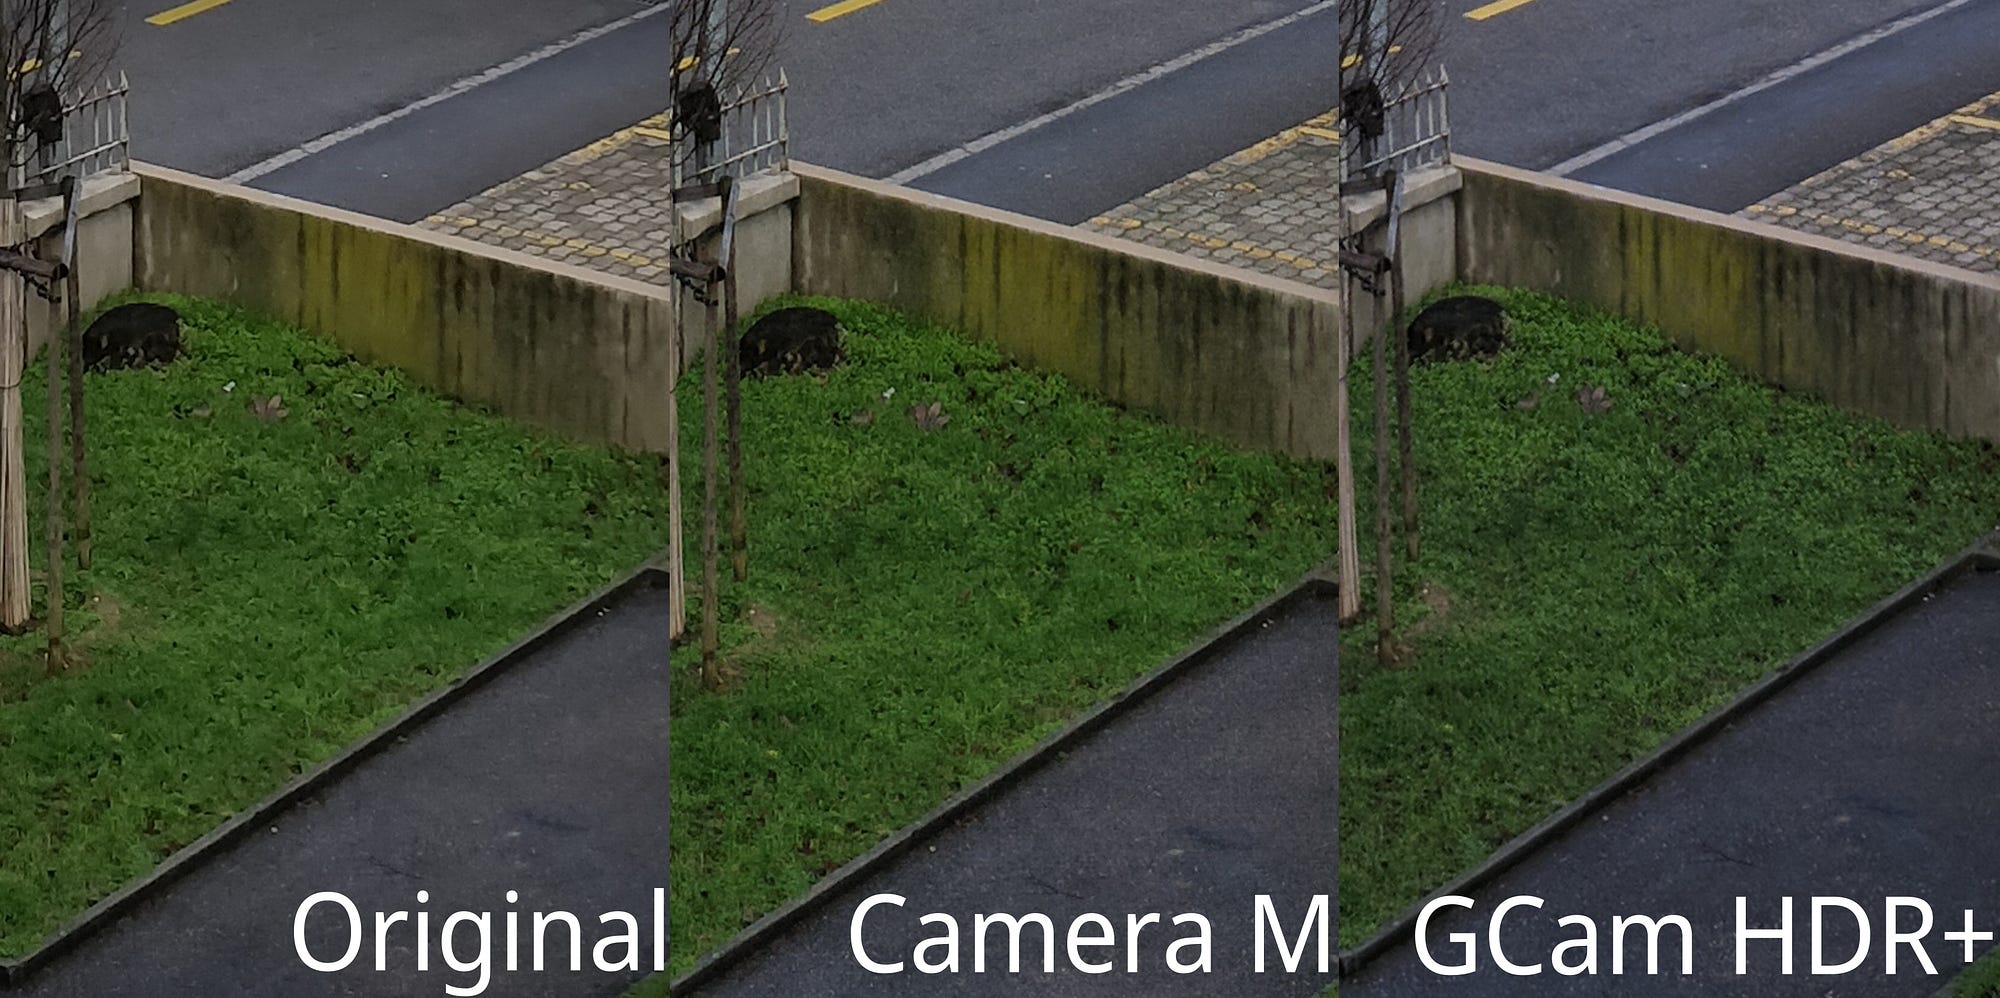 GCam mod on OnePlus 7 proves why Google should be licensing this technology  but it's not going to happen | by warpcore | Medium